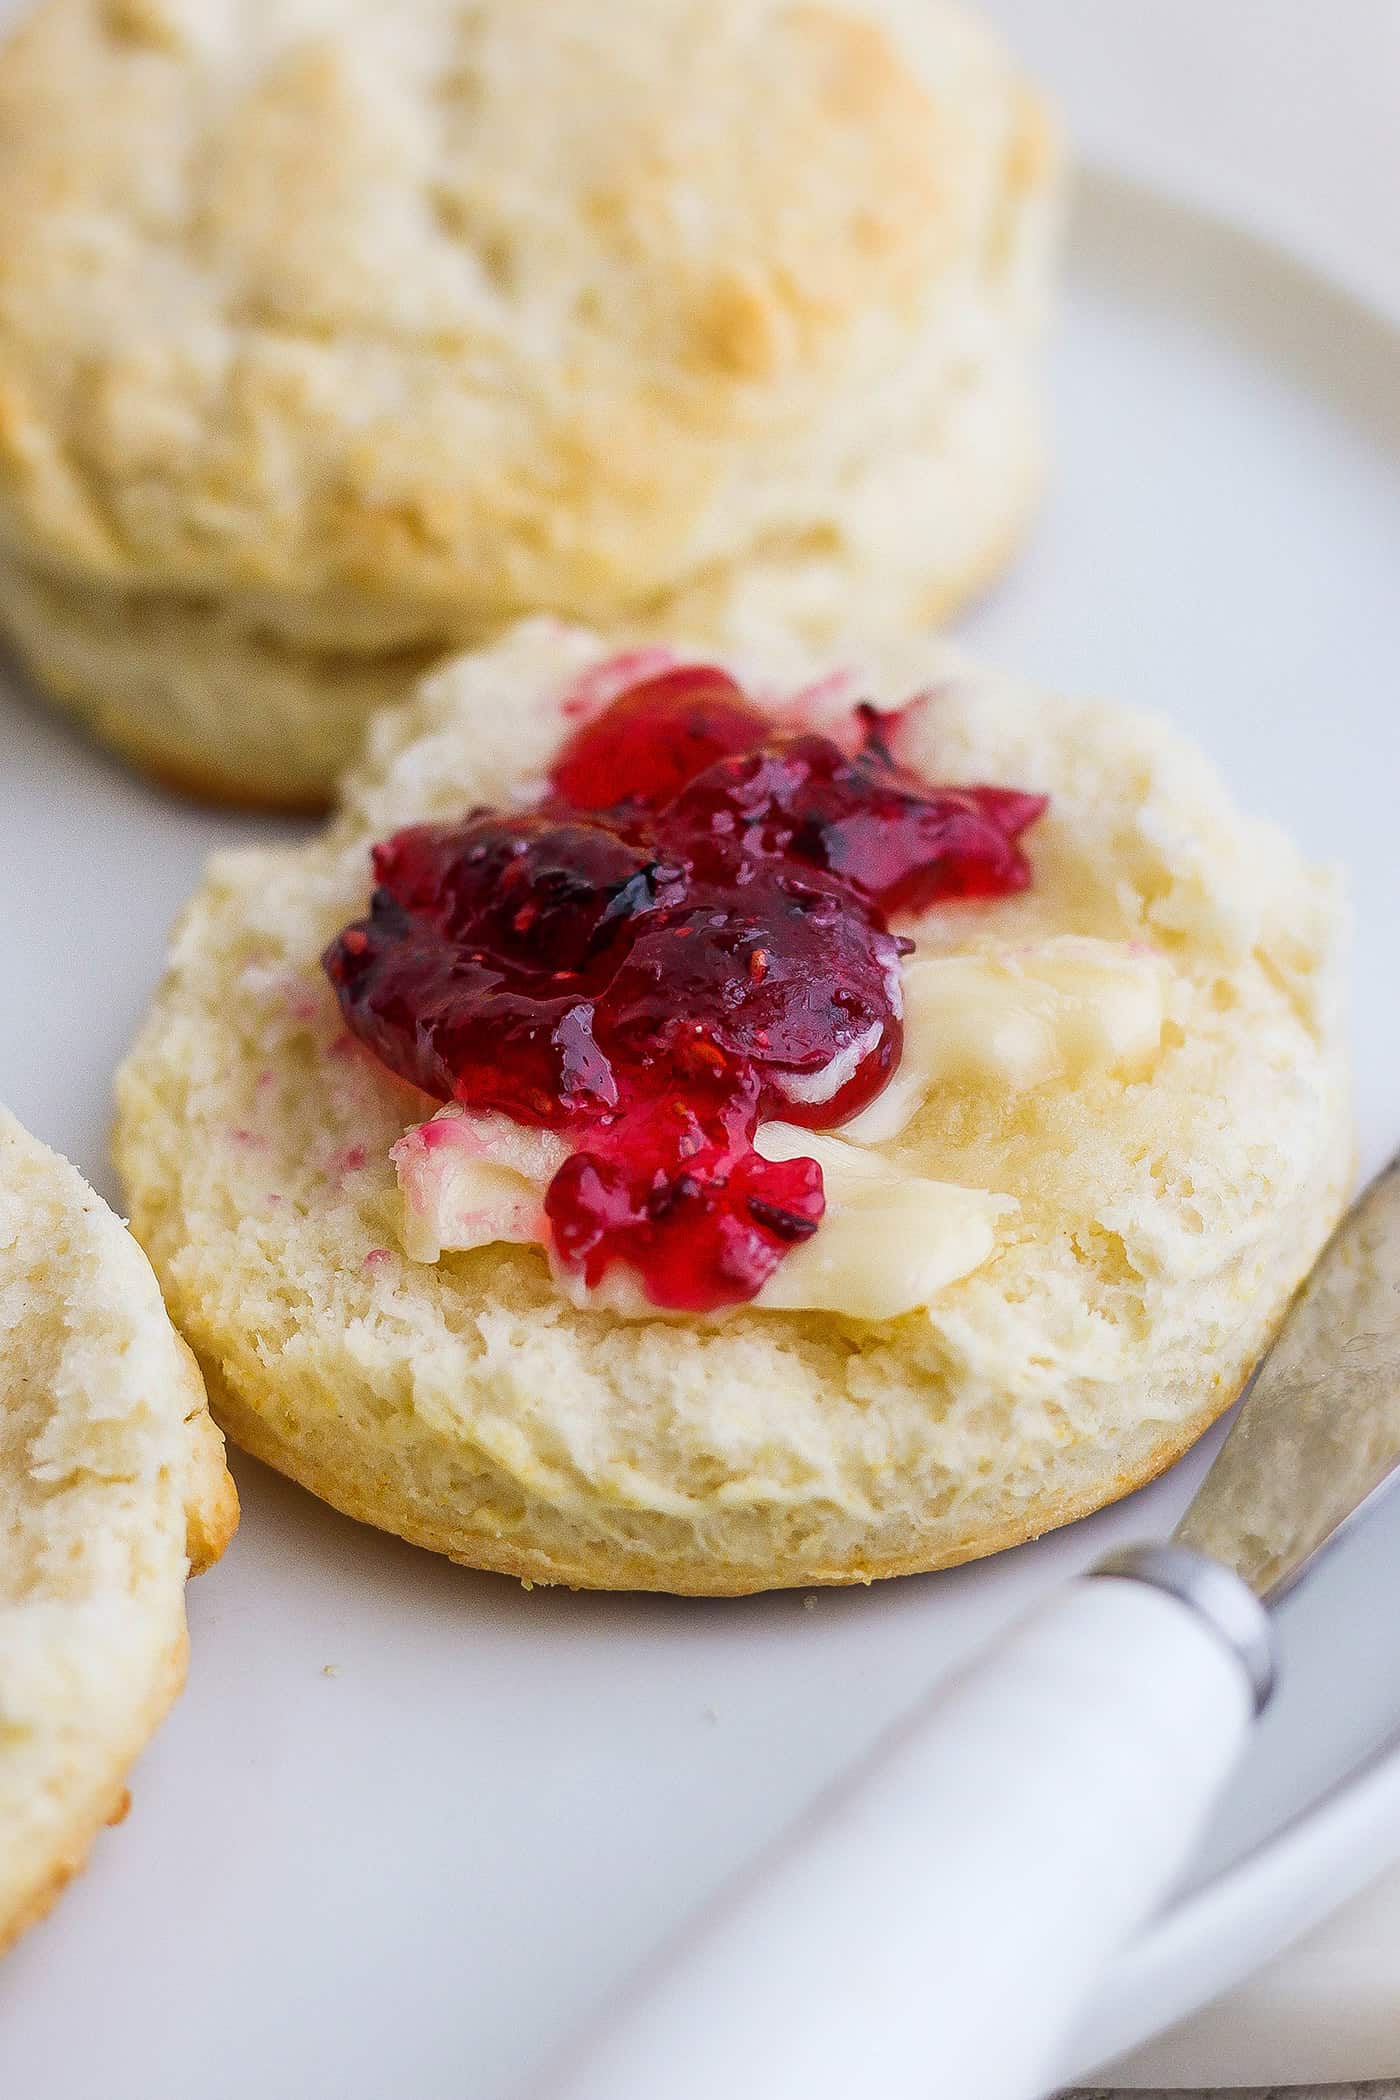 A cut cream biscuit is shown spread with butter and jam with more biscuits in the background.